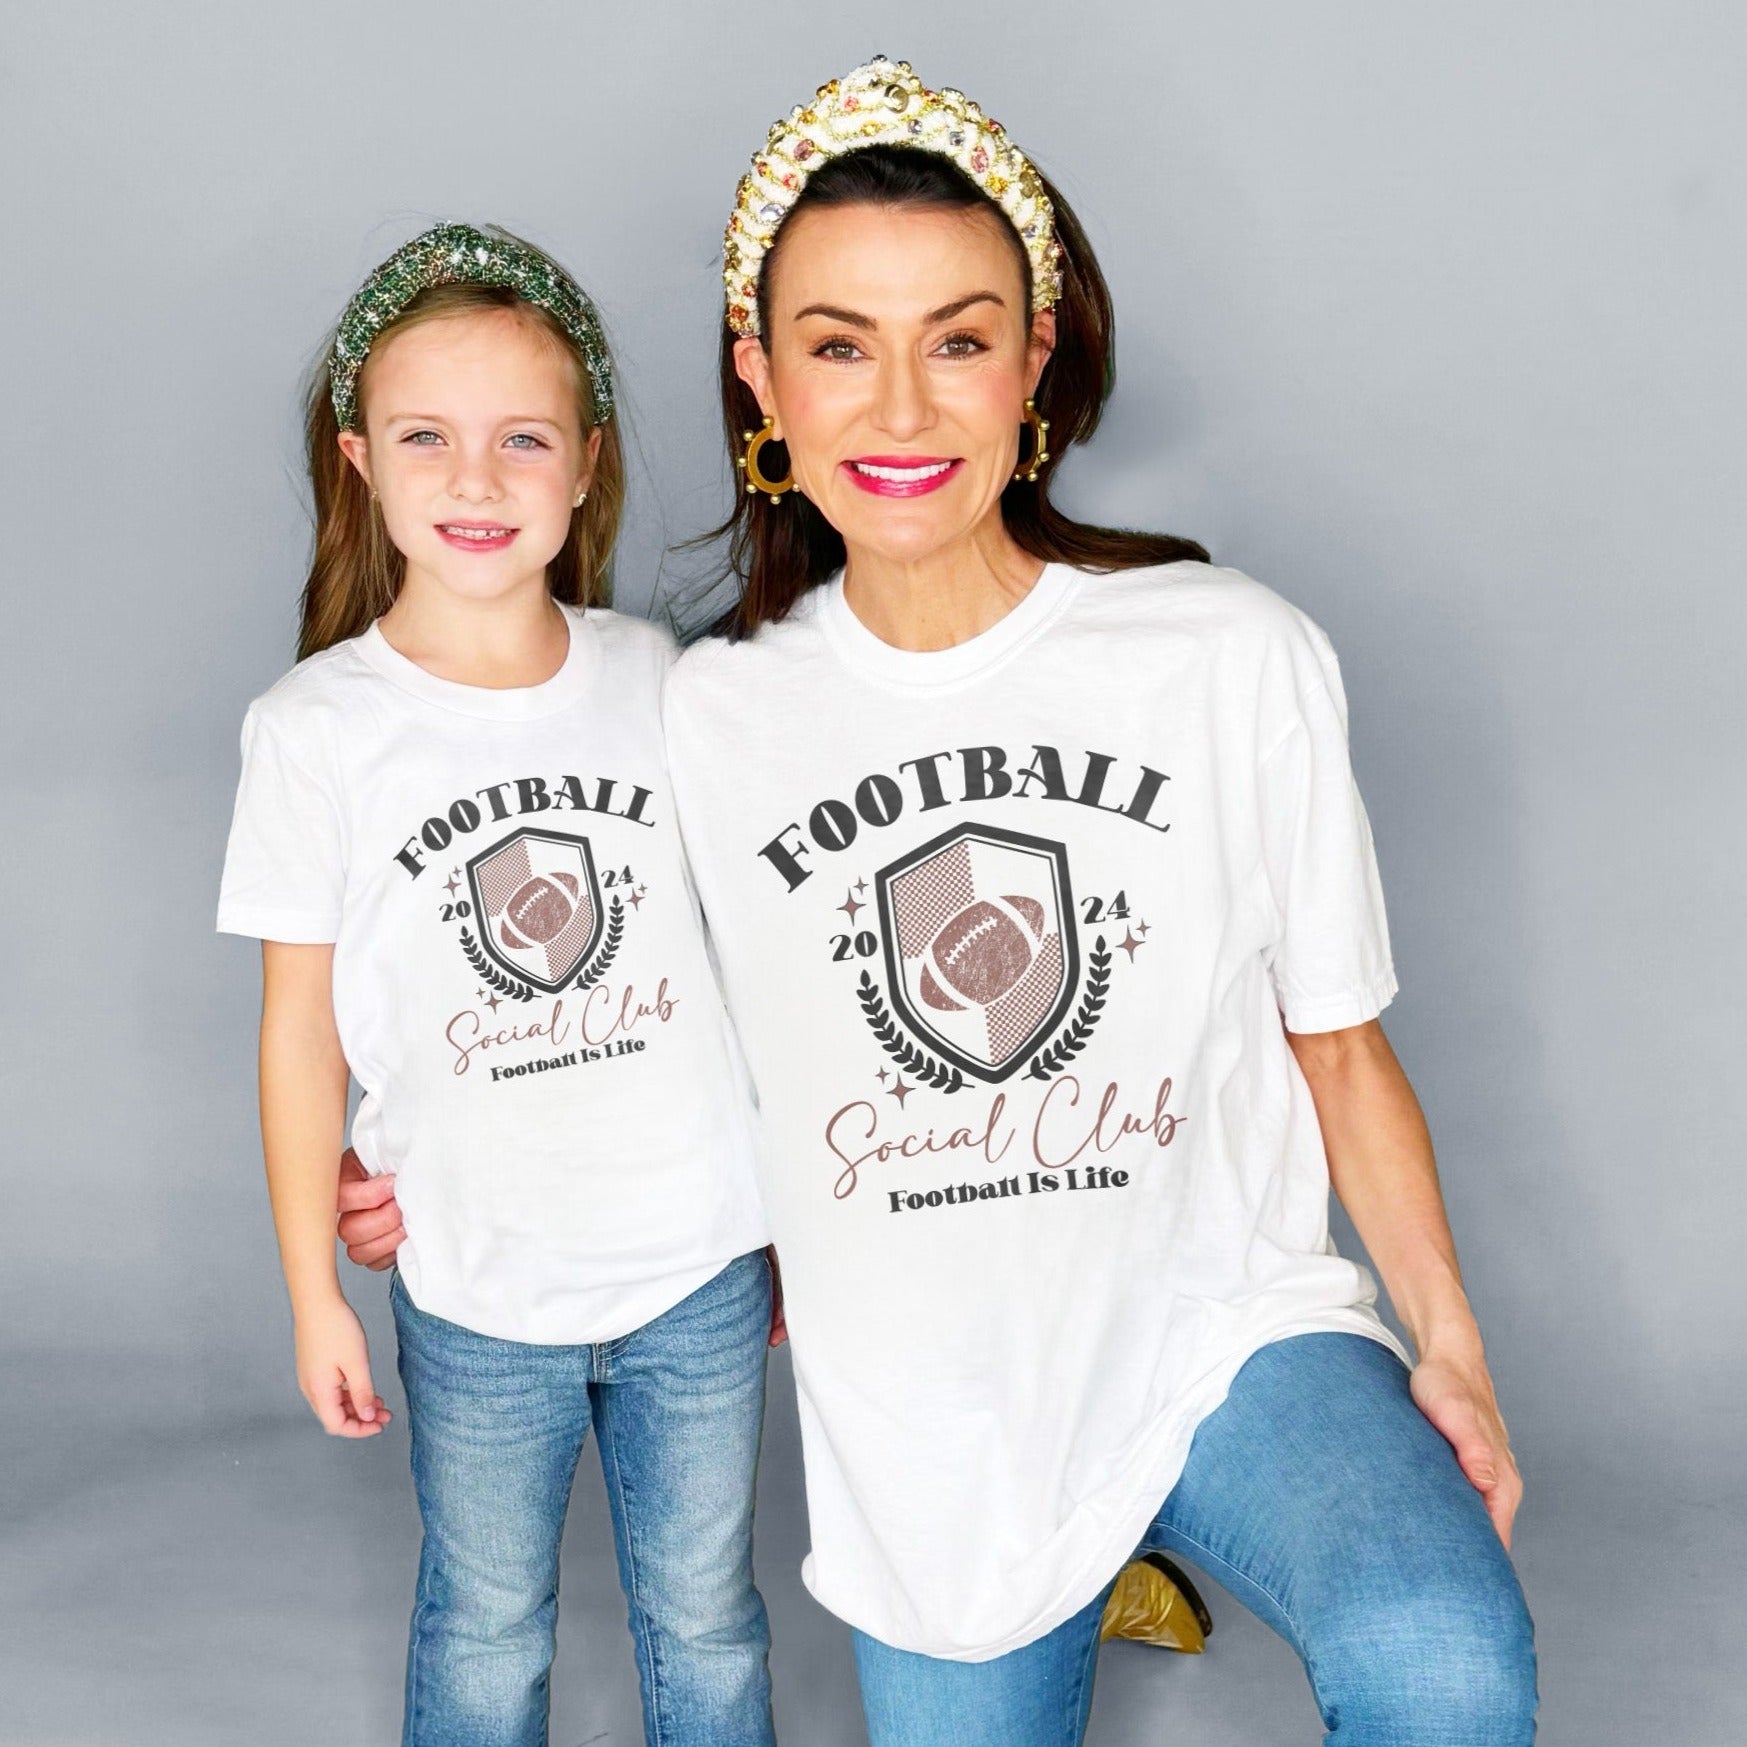 Football Social Club Youth and Adult Tee